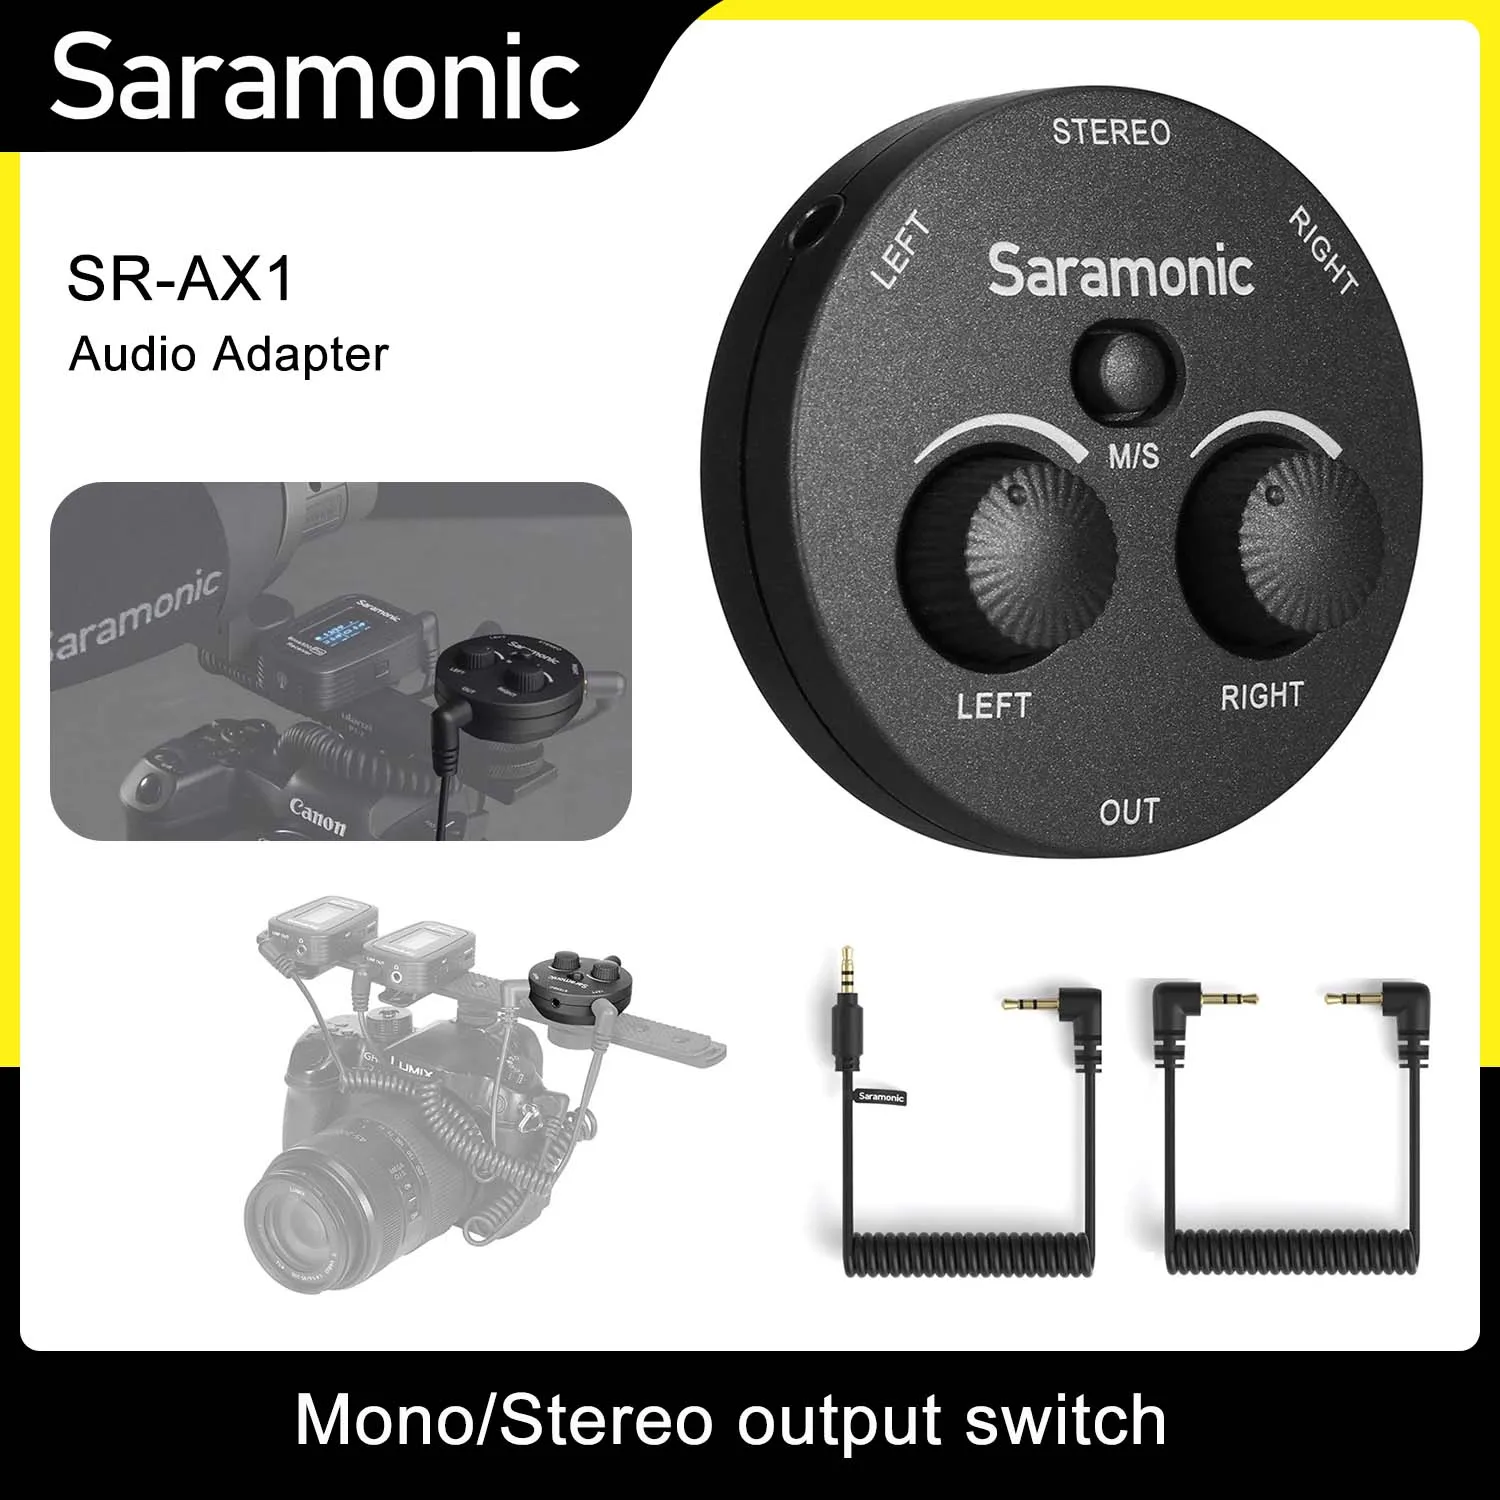 

Saramonic AX1 Audio Adapter Mono Stereo 2 Channel Microphone Audio Mixer for DSLR Mirrorless Video Cameras Smartphone Laptop